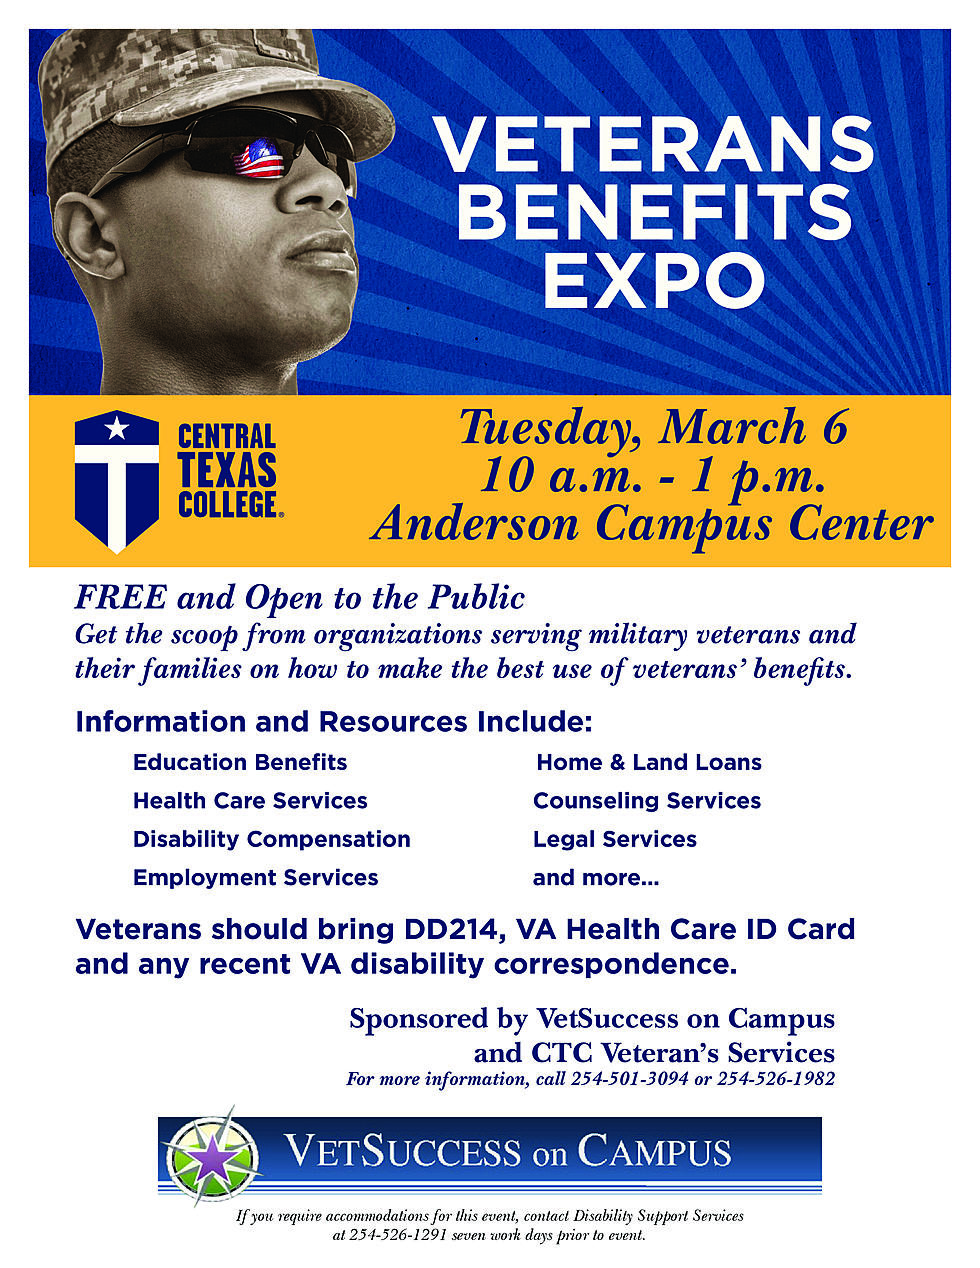 Veterans Benefits Expo at Central Texas College